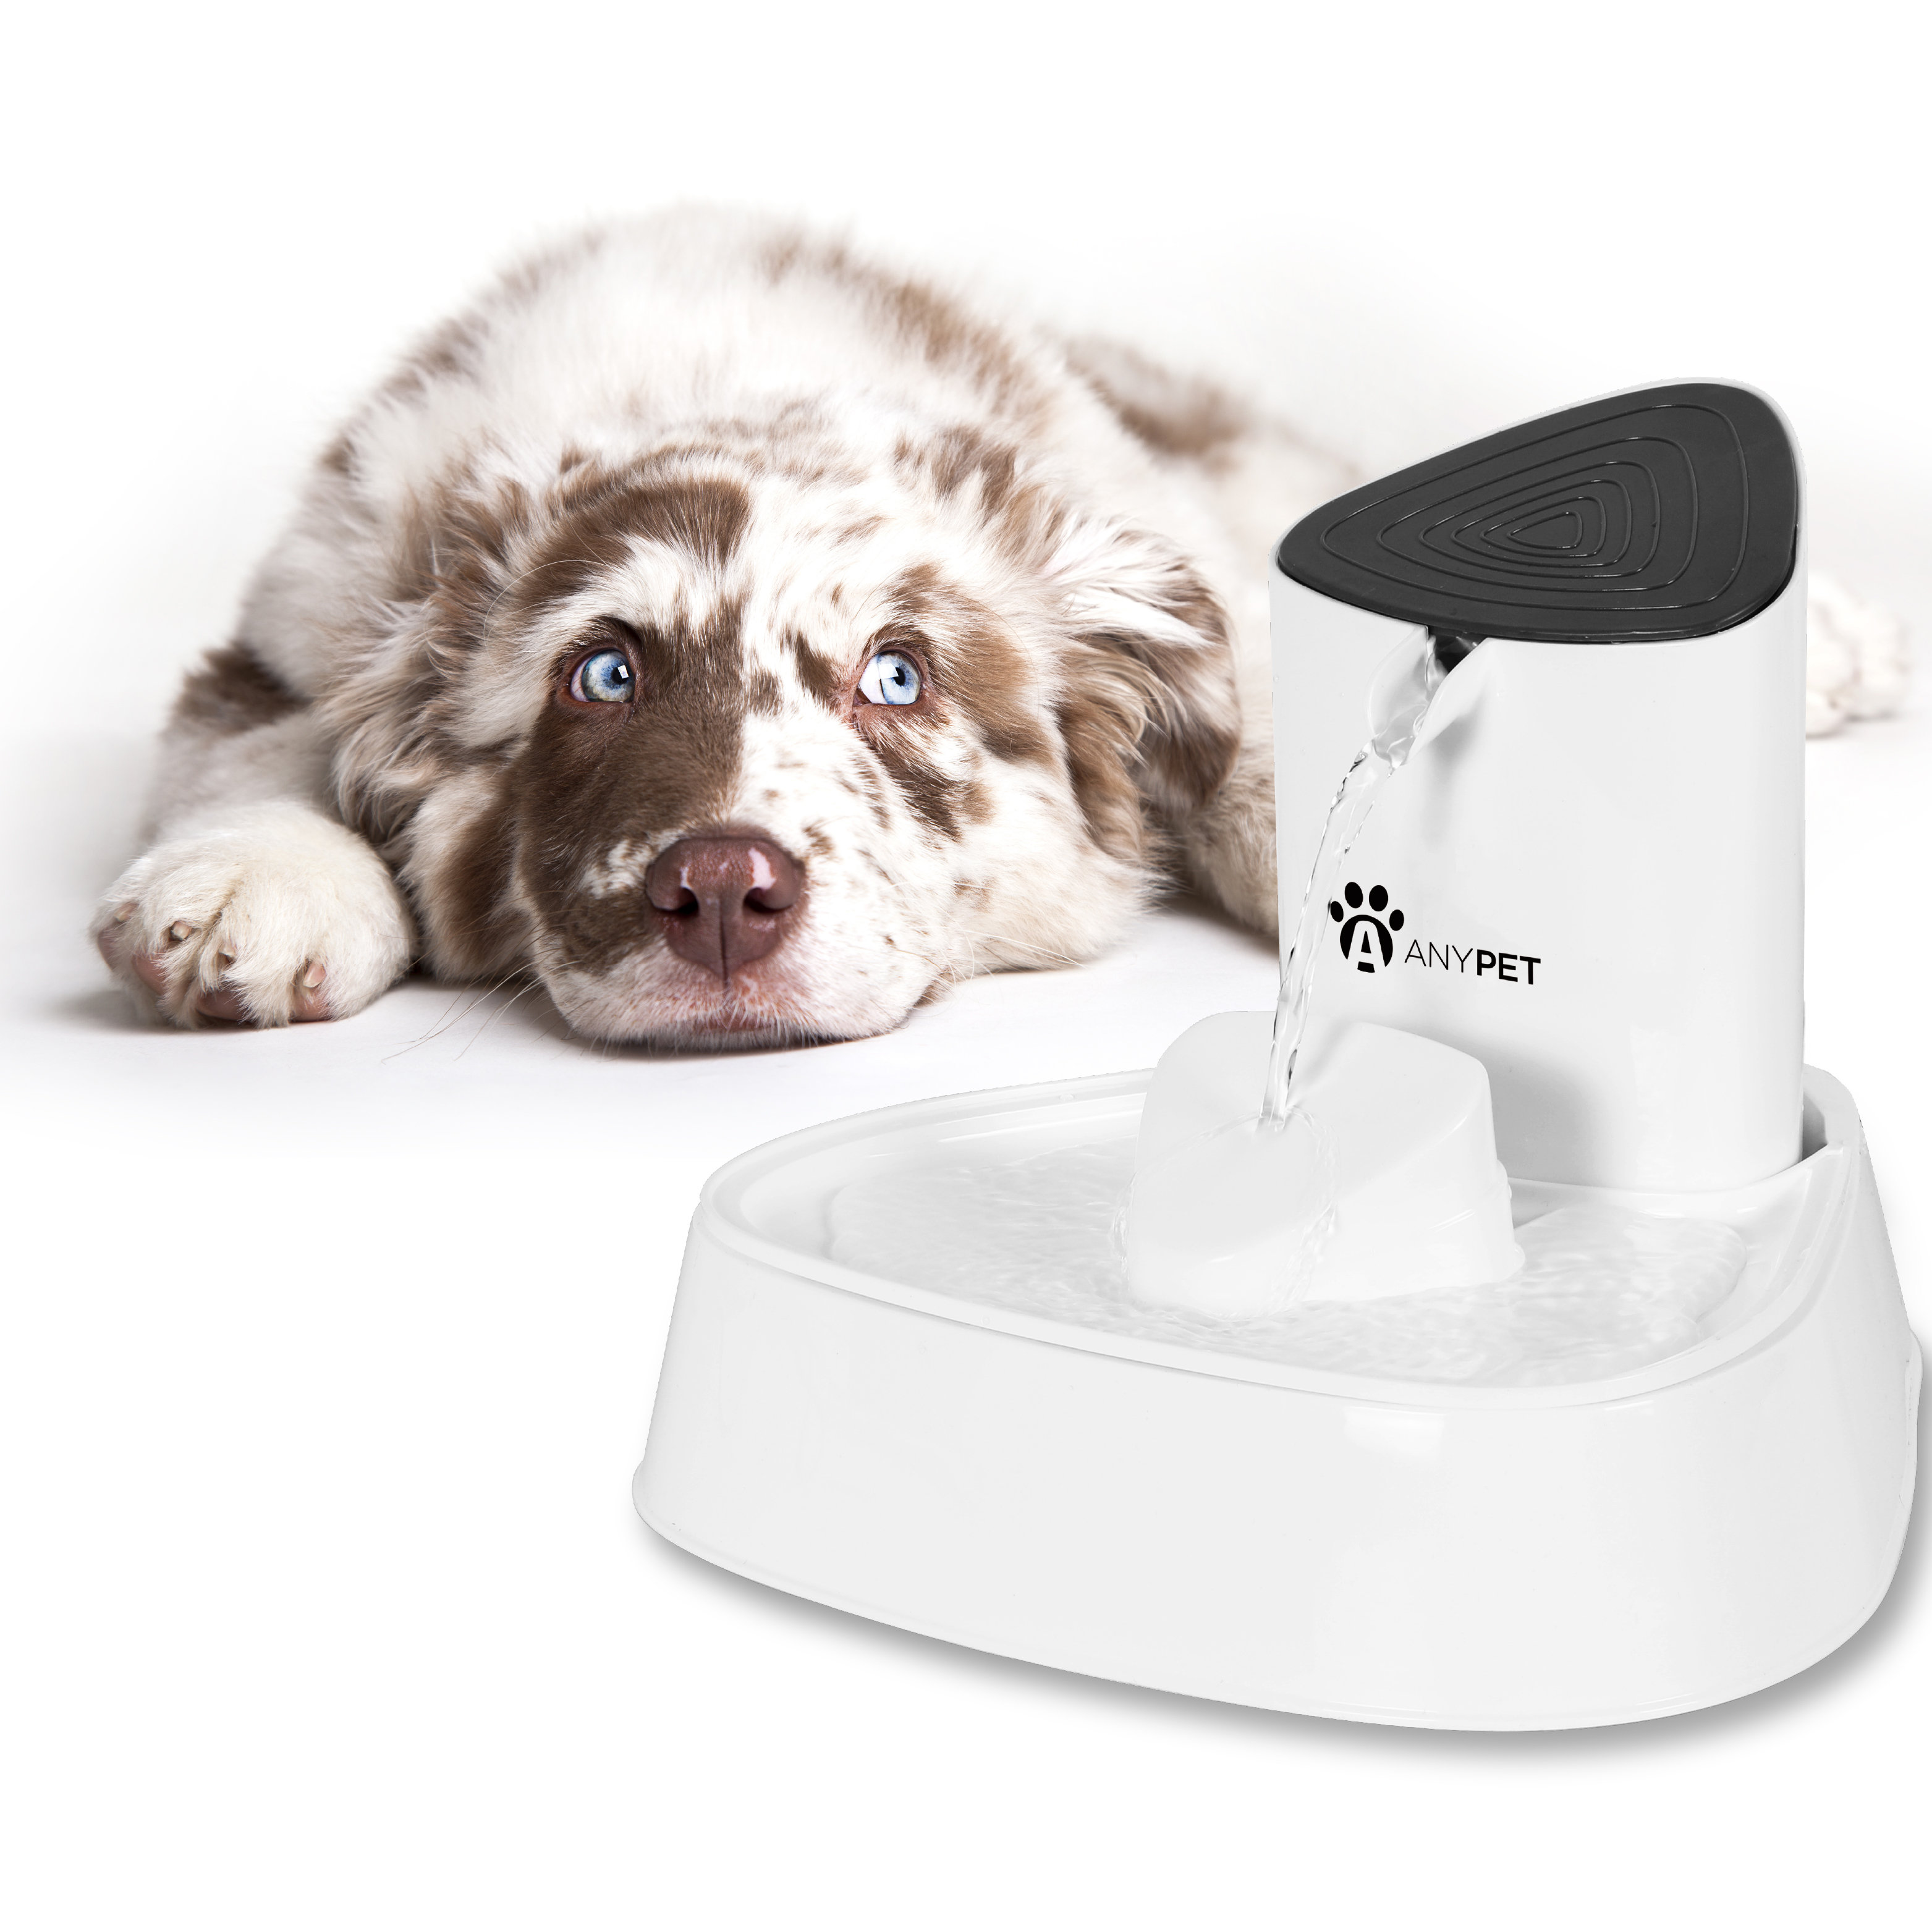 MIFXIN Pet Automatic Water Dish & Reviews